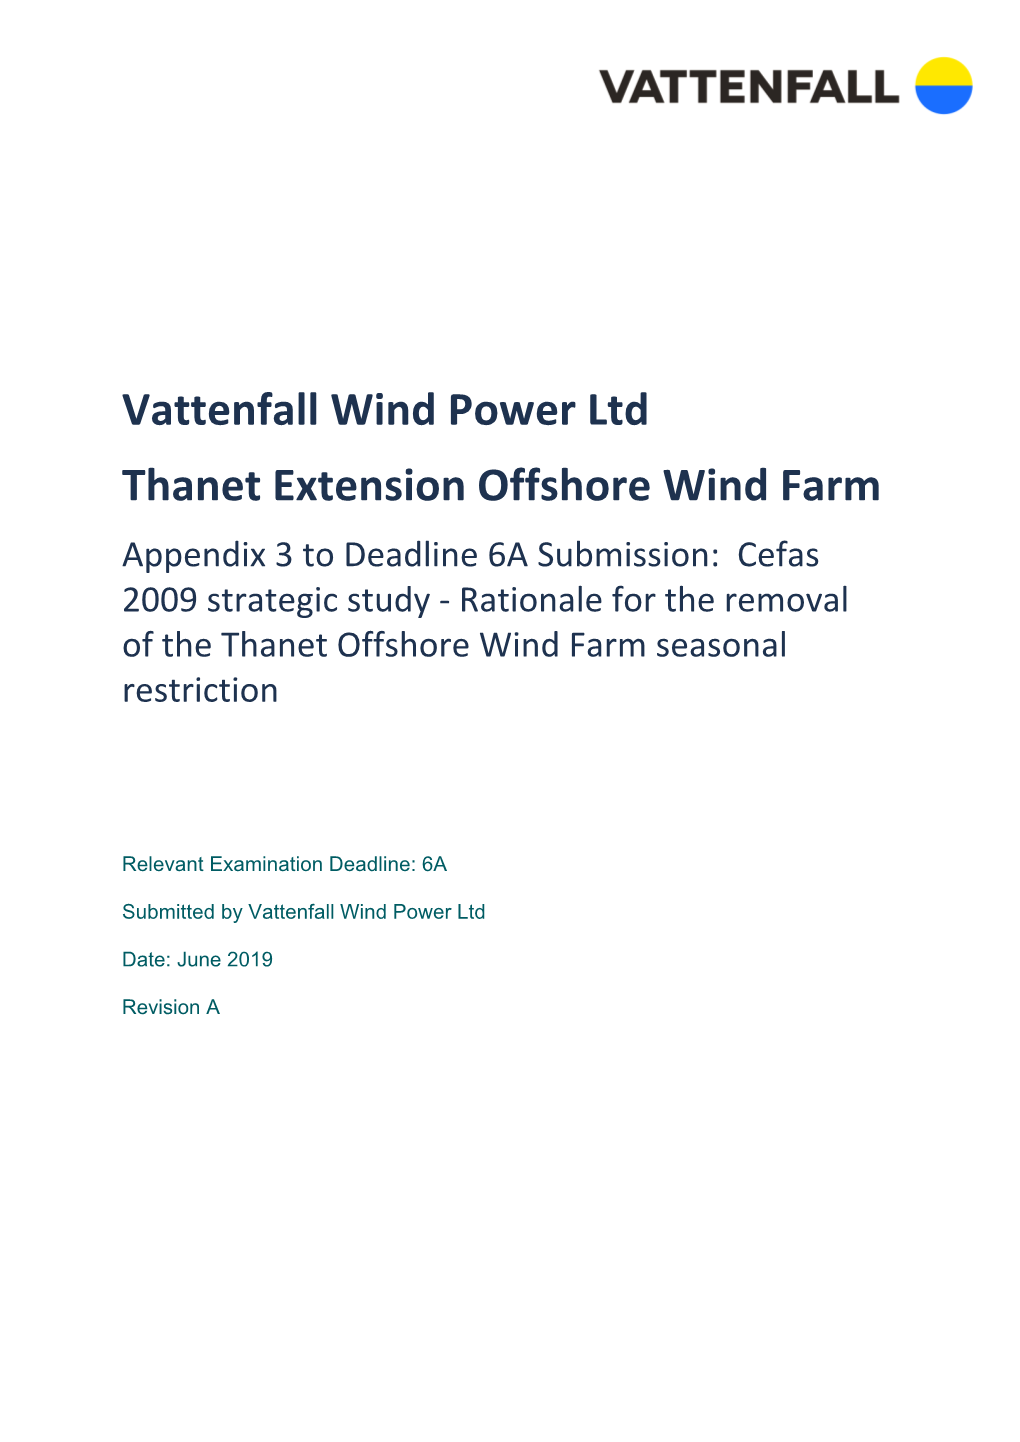 Strategic Review of Offshore Wind Farm Monitoring Data Associated with FEPA Licence Conditions